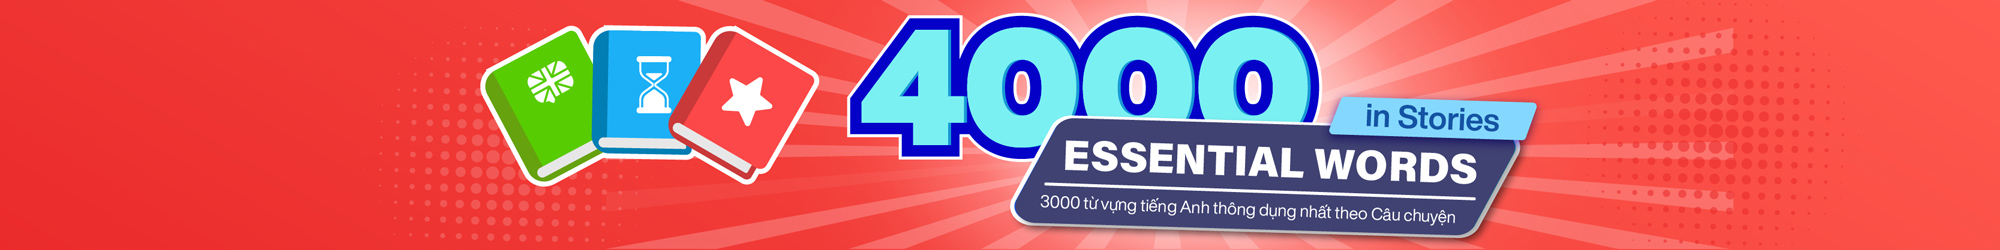 4000 ESSENTIAL ENGLISH WORDS in STORIES